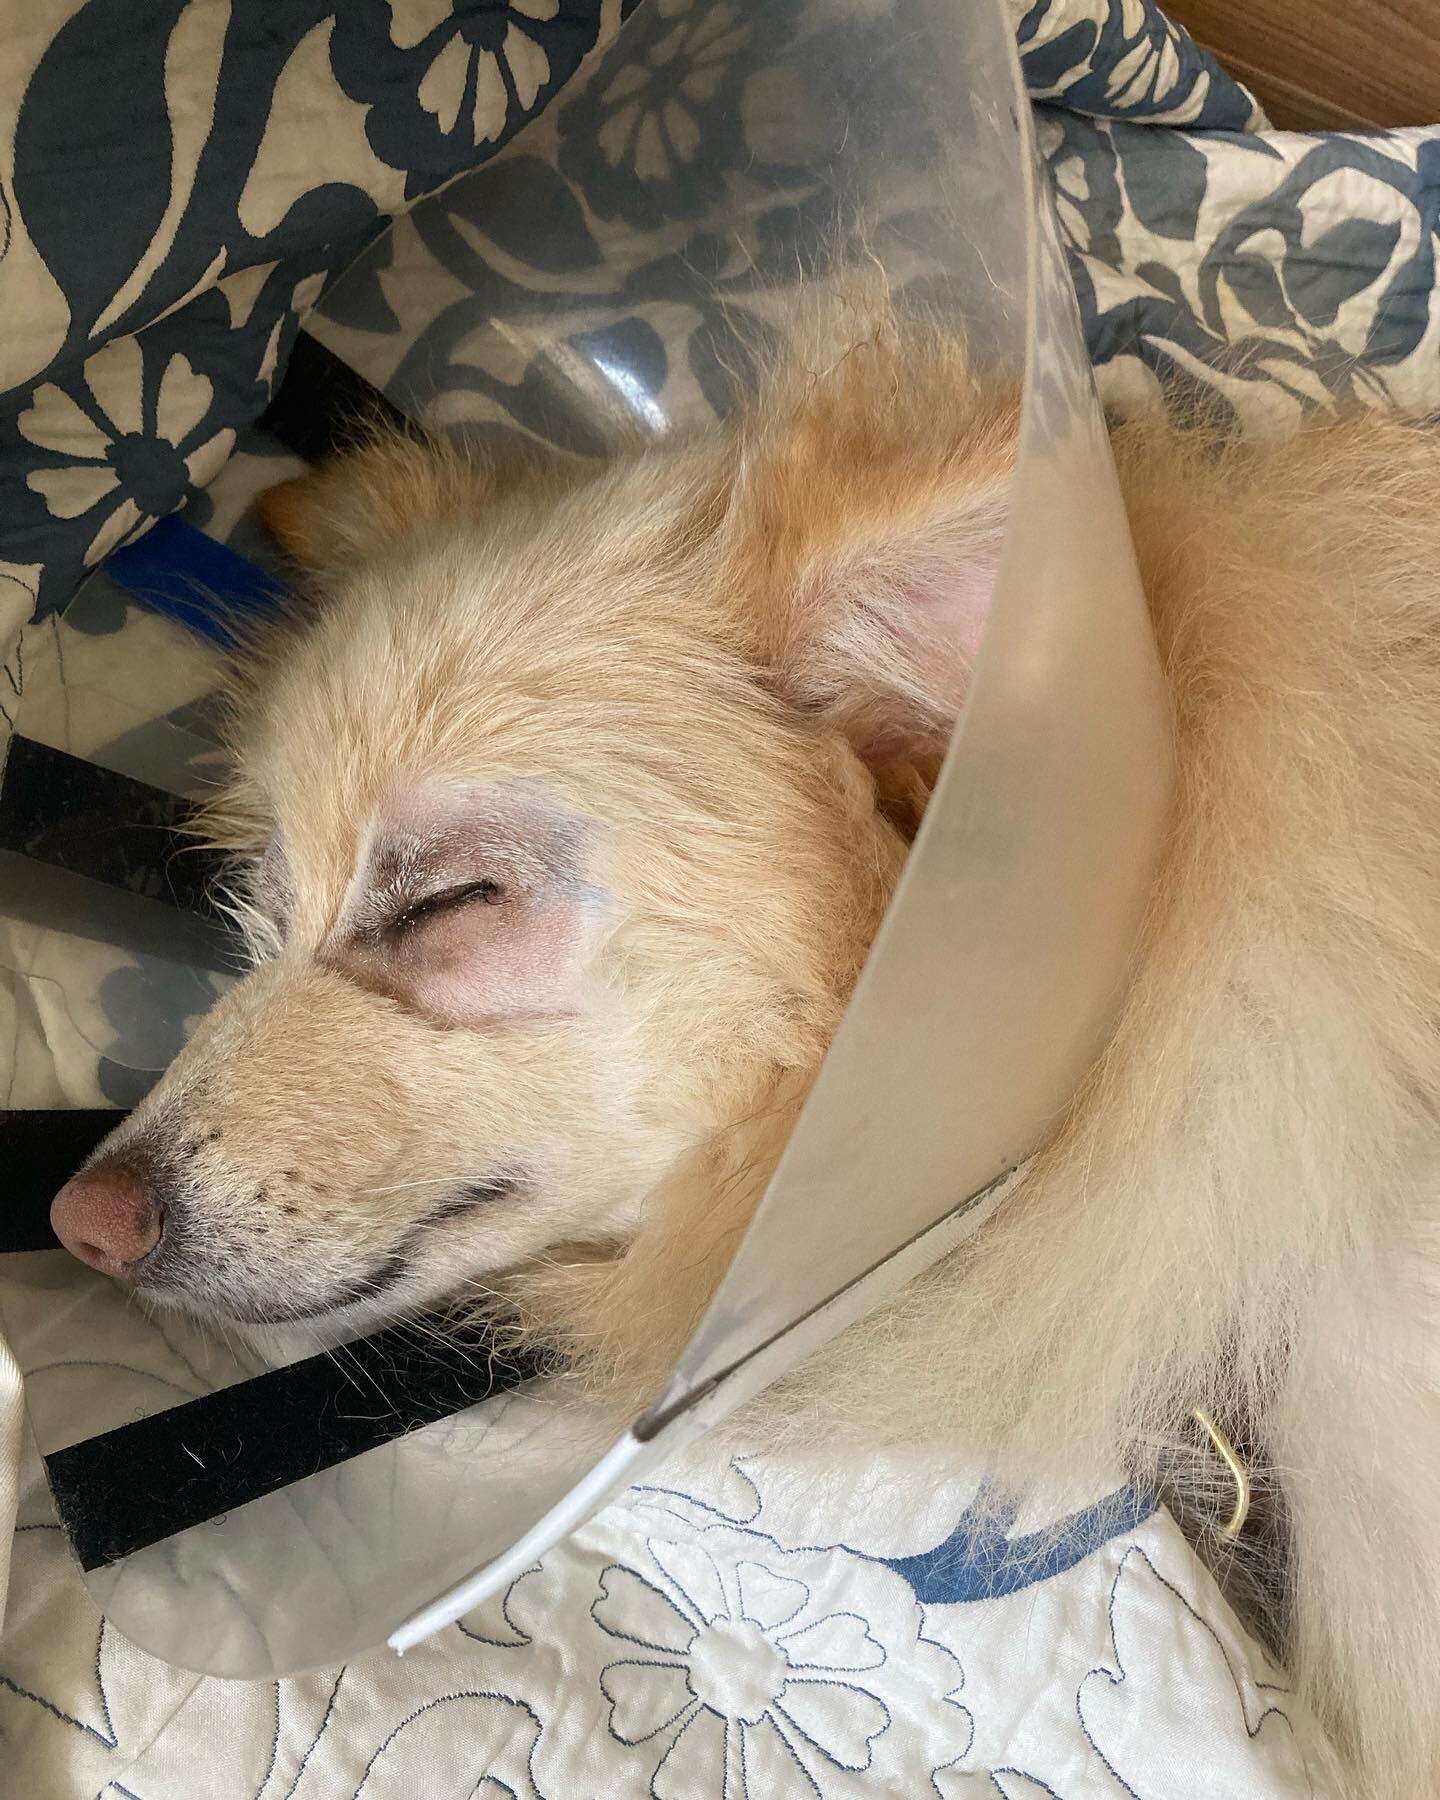 White dog takes a nap while recovering from surgery.